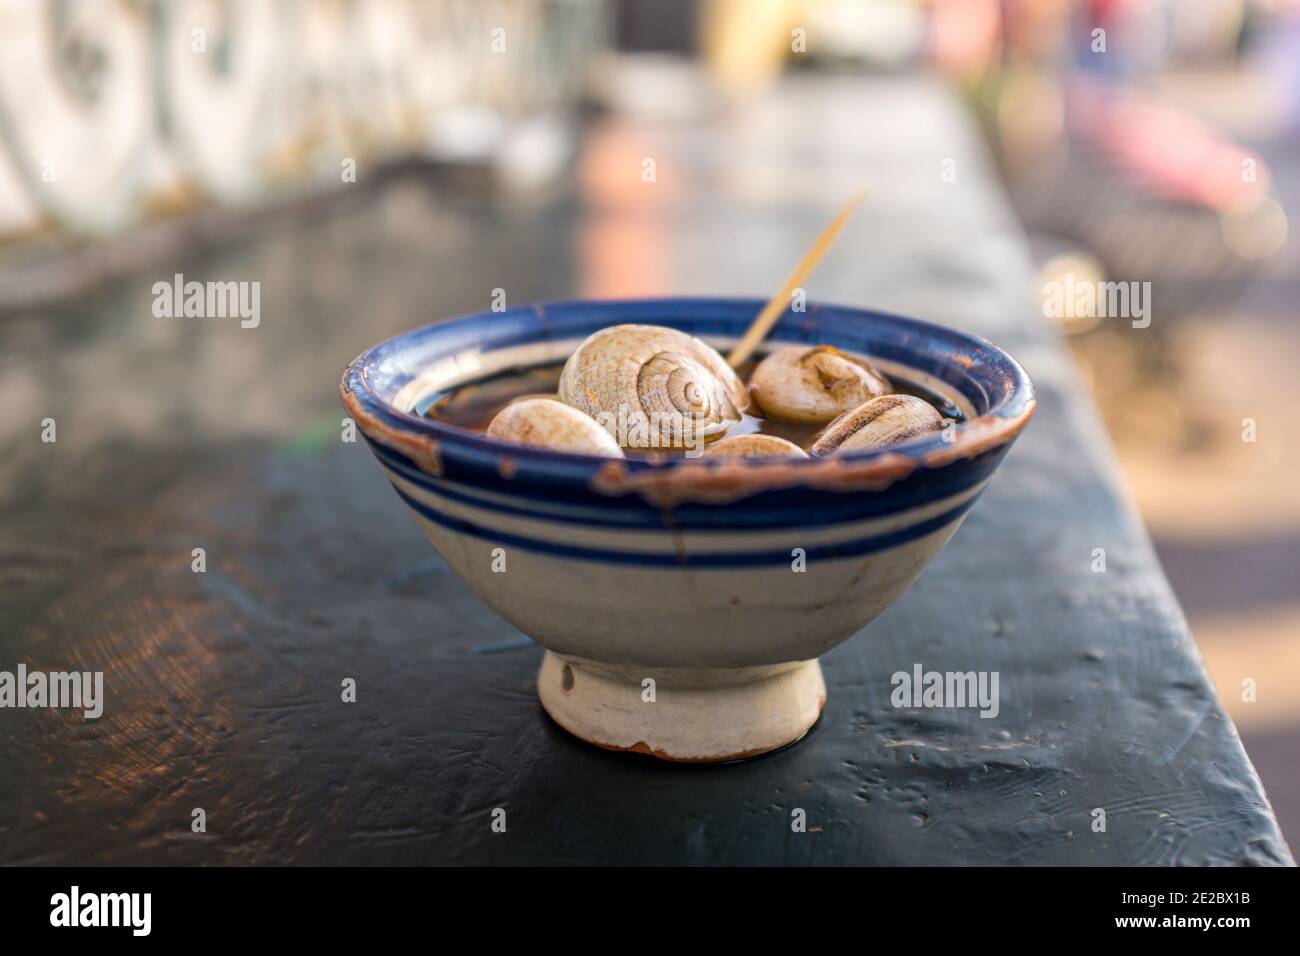 Bowl of snail soup, flavored with a concoction of around 15 spices, at a stall in Marrakech, Morocco Stock Photo